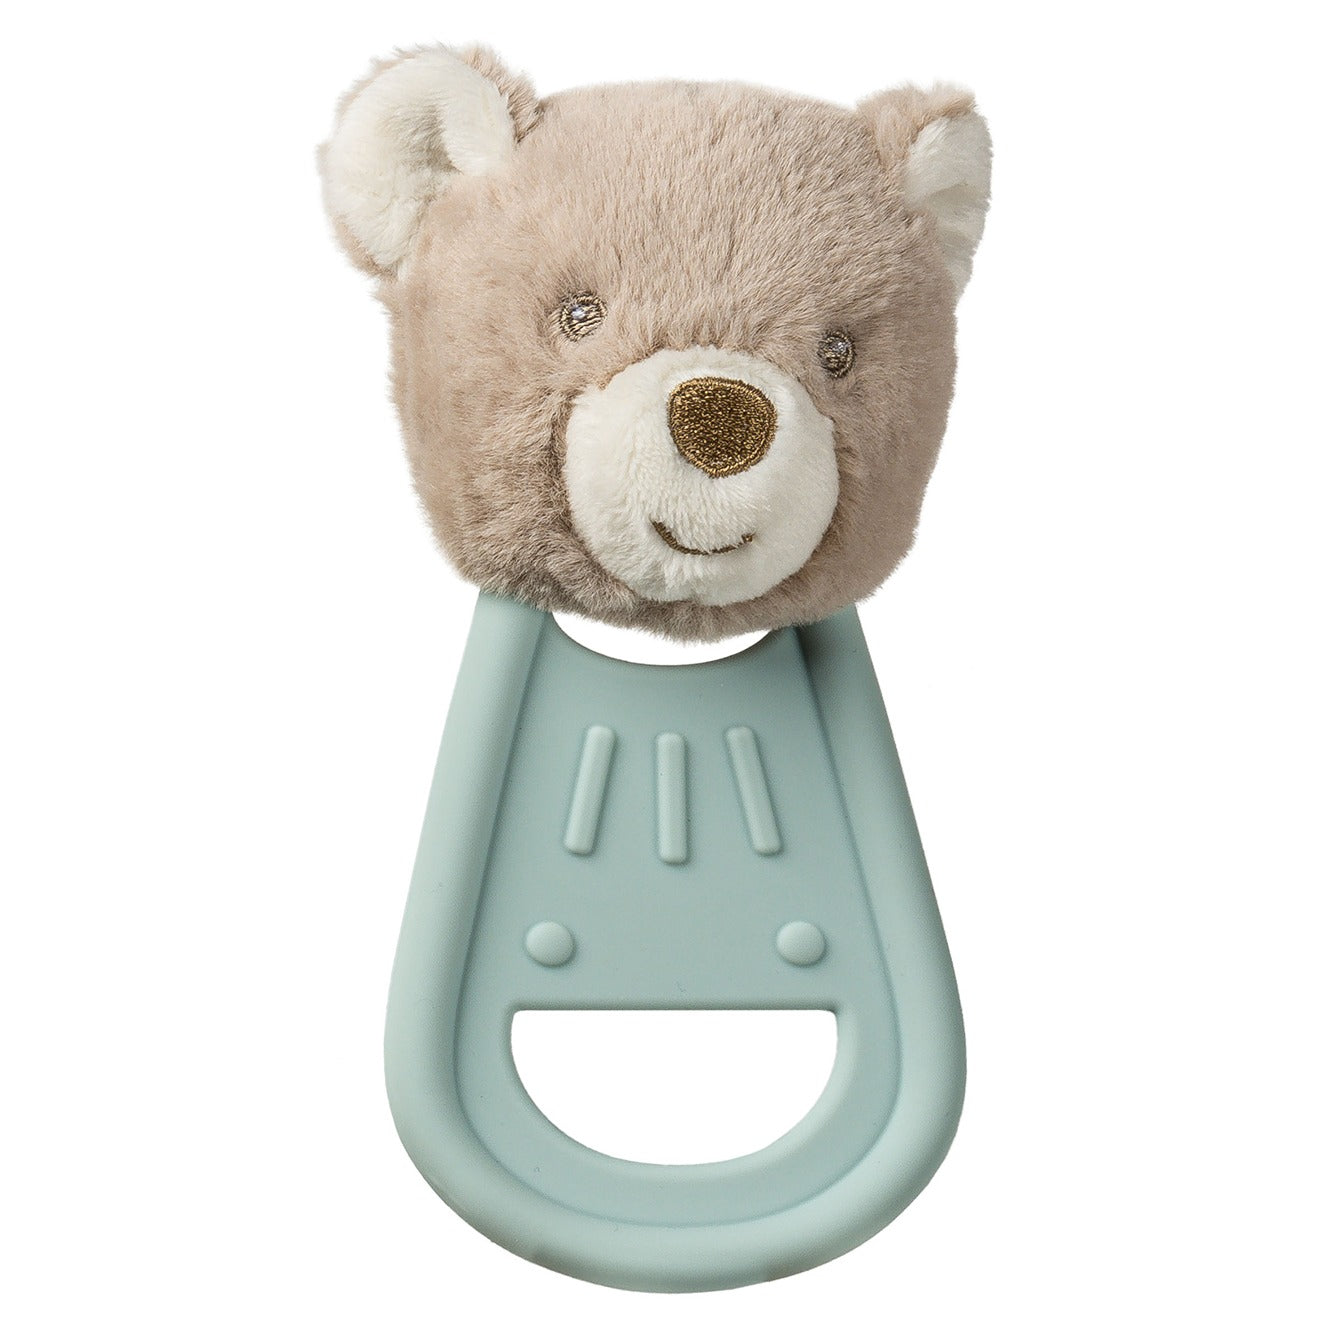 Simply Silicone Character Teether – Teddy